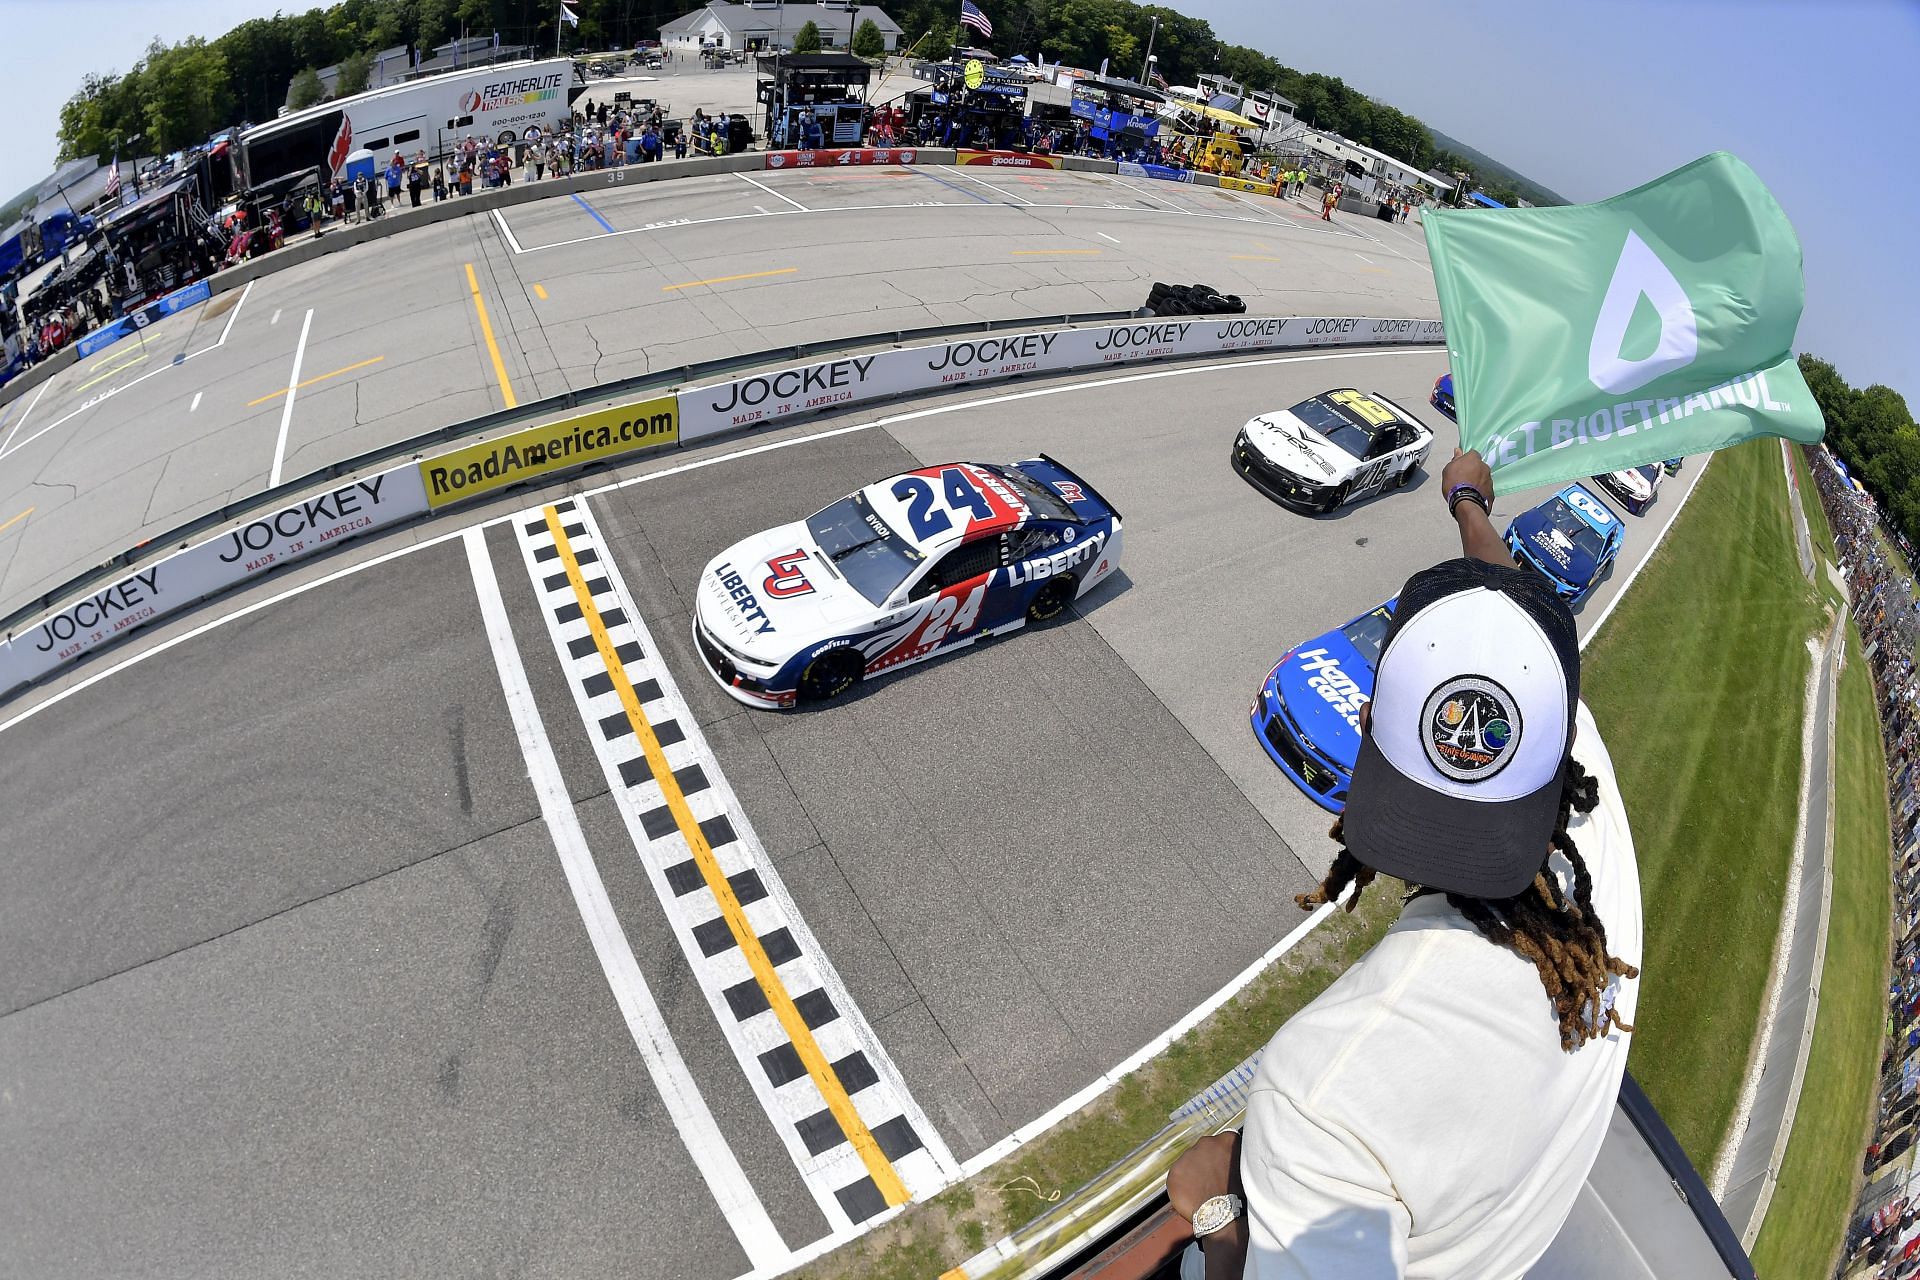 William Byron leads the field to the green flag waved by running back Aaron Jones of the Green Bay Packers to start the 2021 NASCAR Cup Series Jockey Made in America 250 Presented by Kwik Trip at Road America in Elkhart Lake, Wisconsin (Photo by Logan Riely/Getty Images)